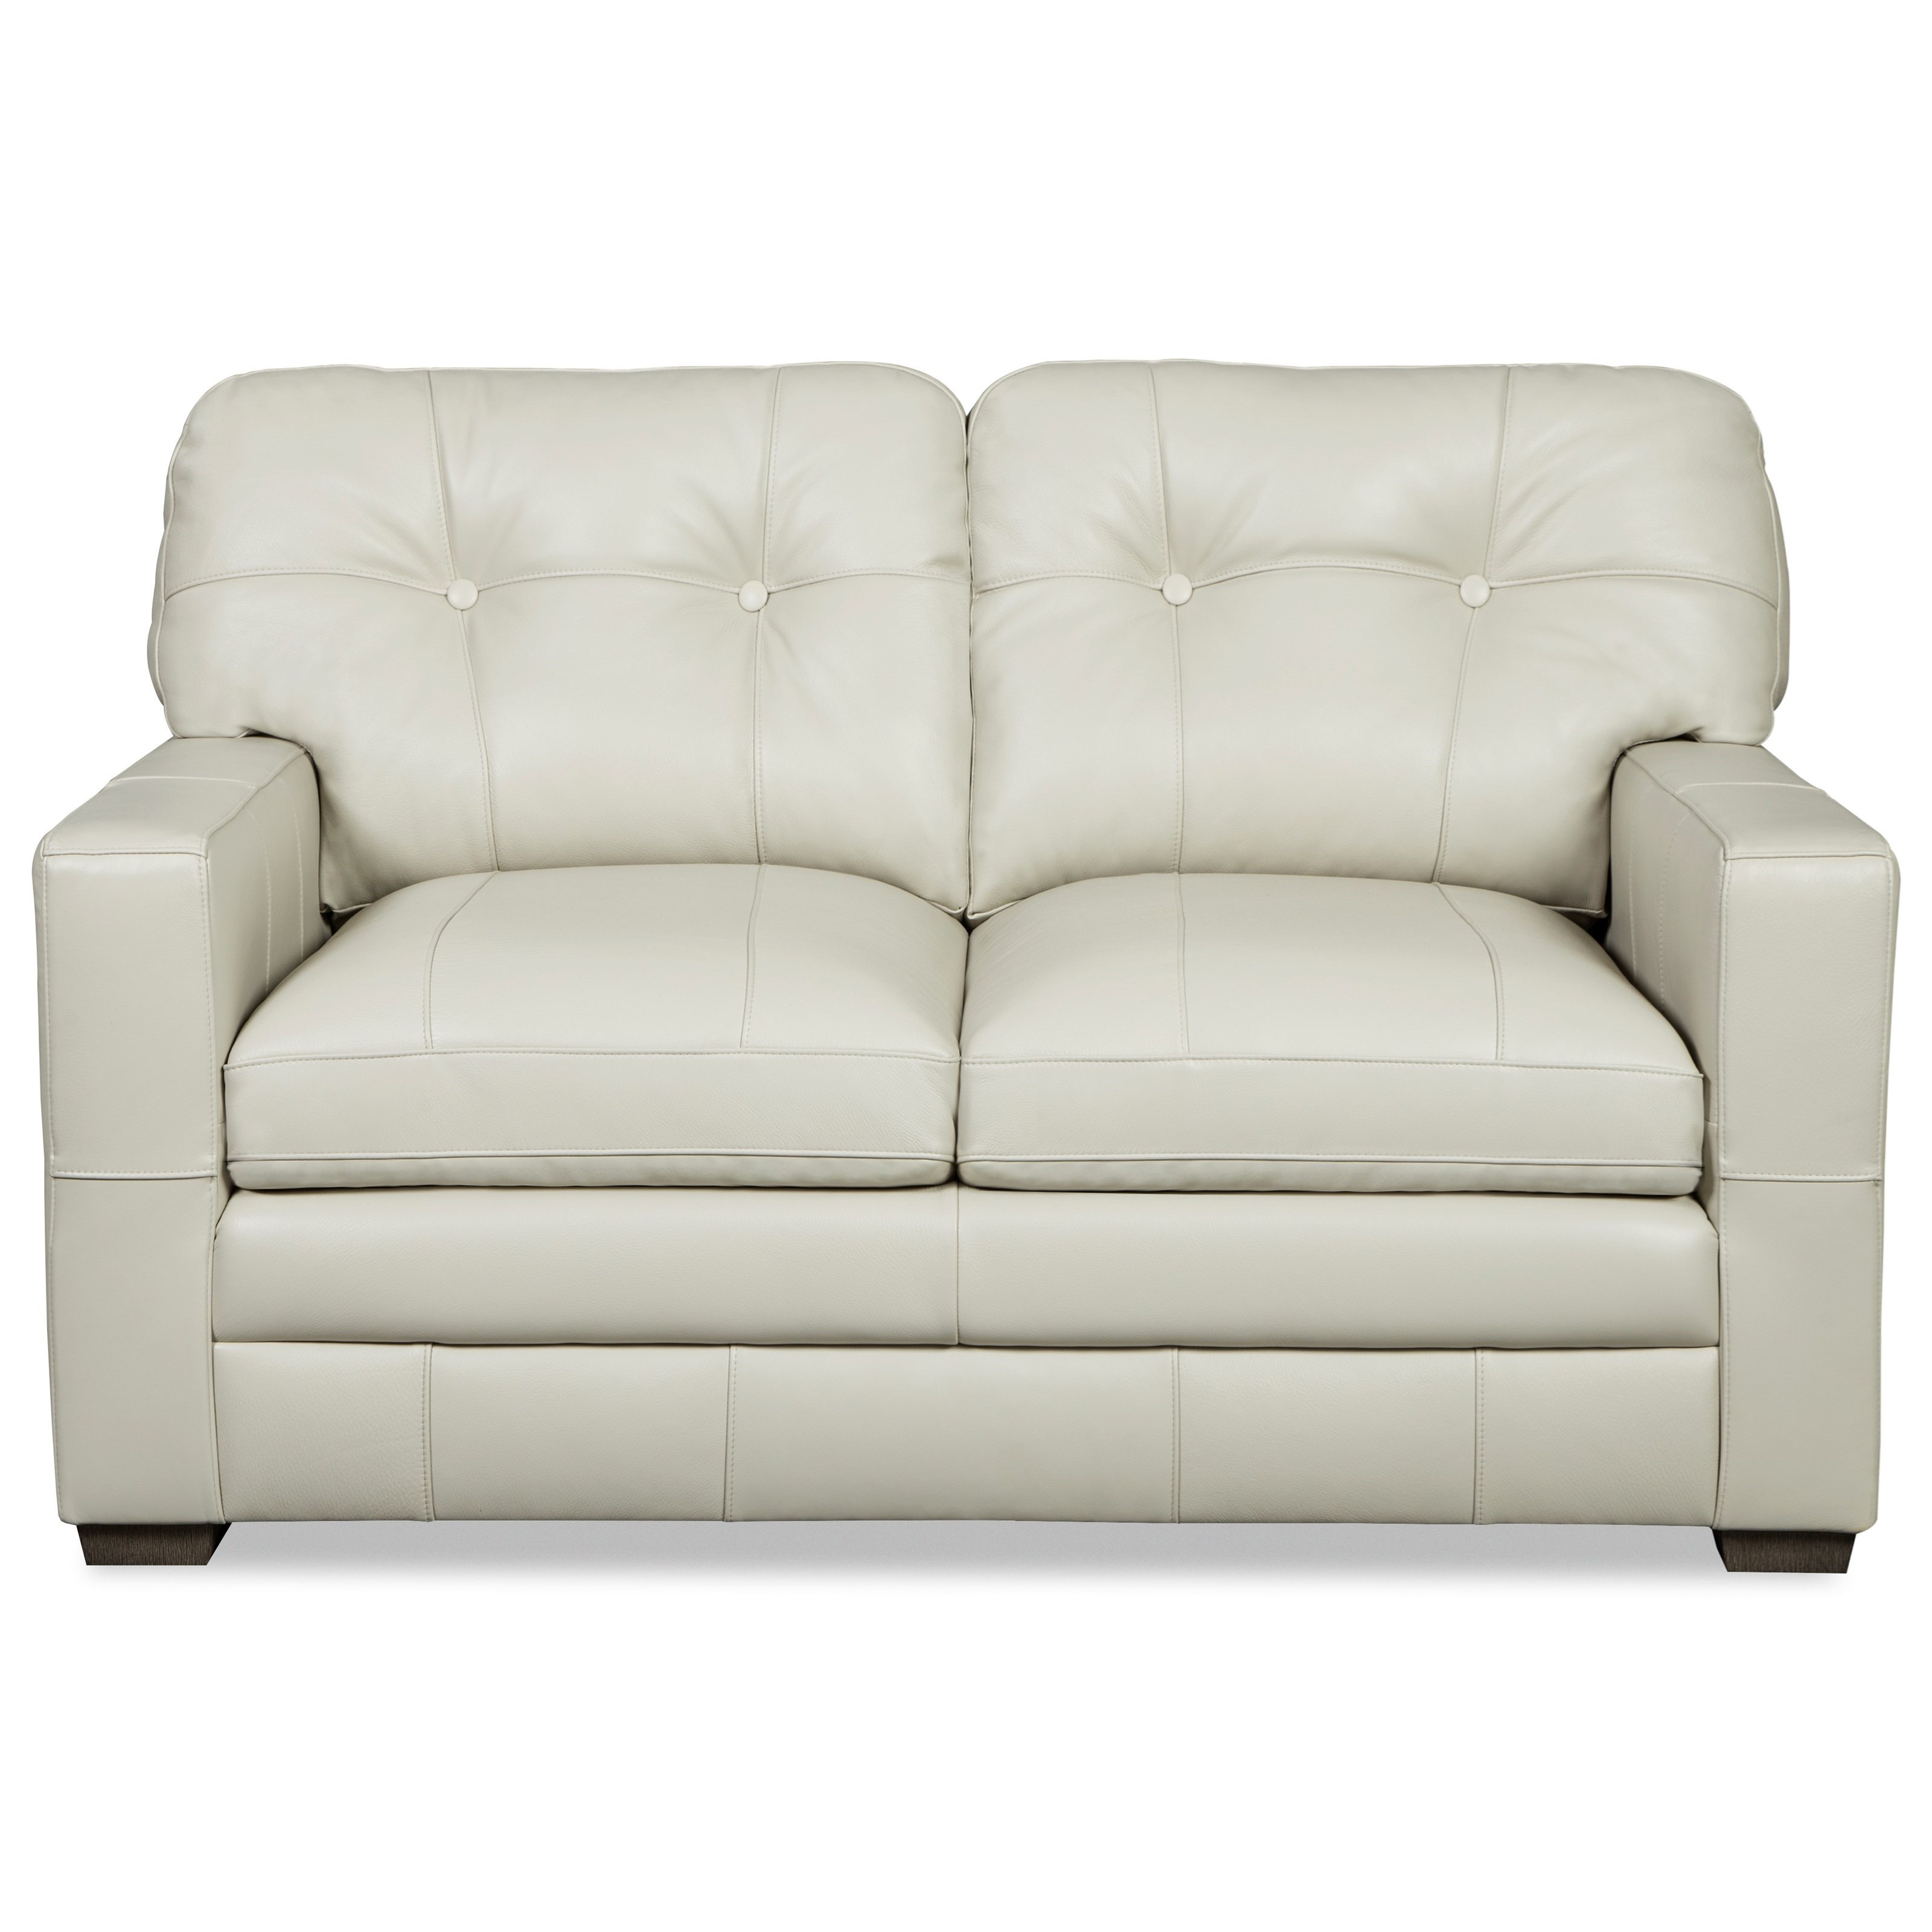 Best Home Furnishings Cabrillo Contemporary Tufted Loveseat